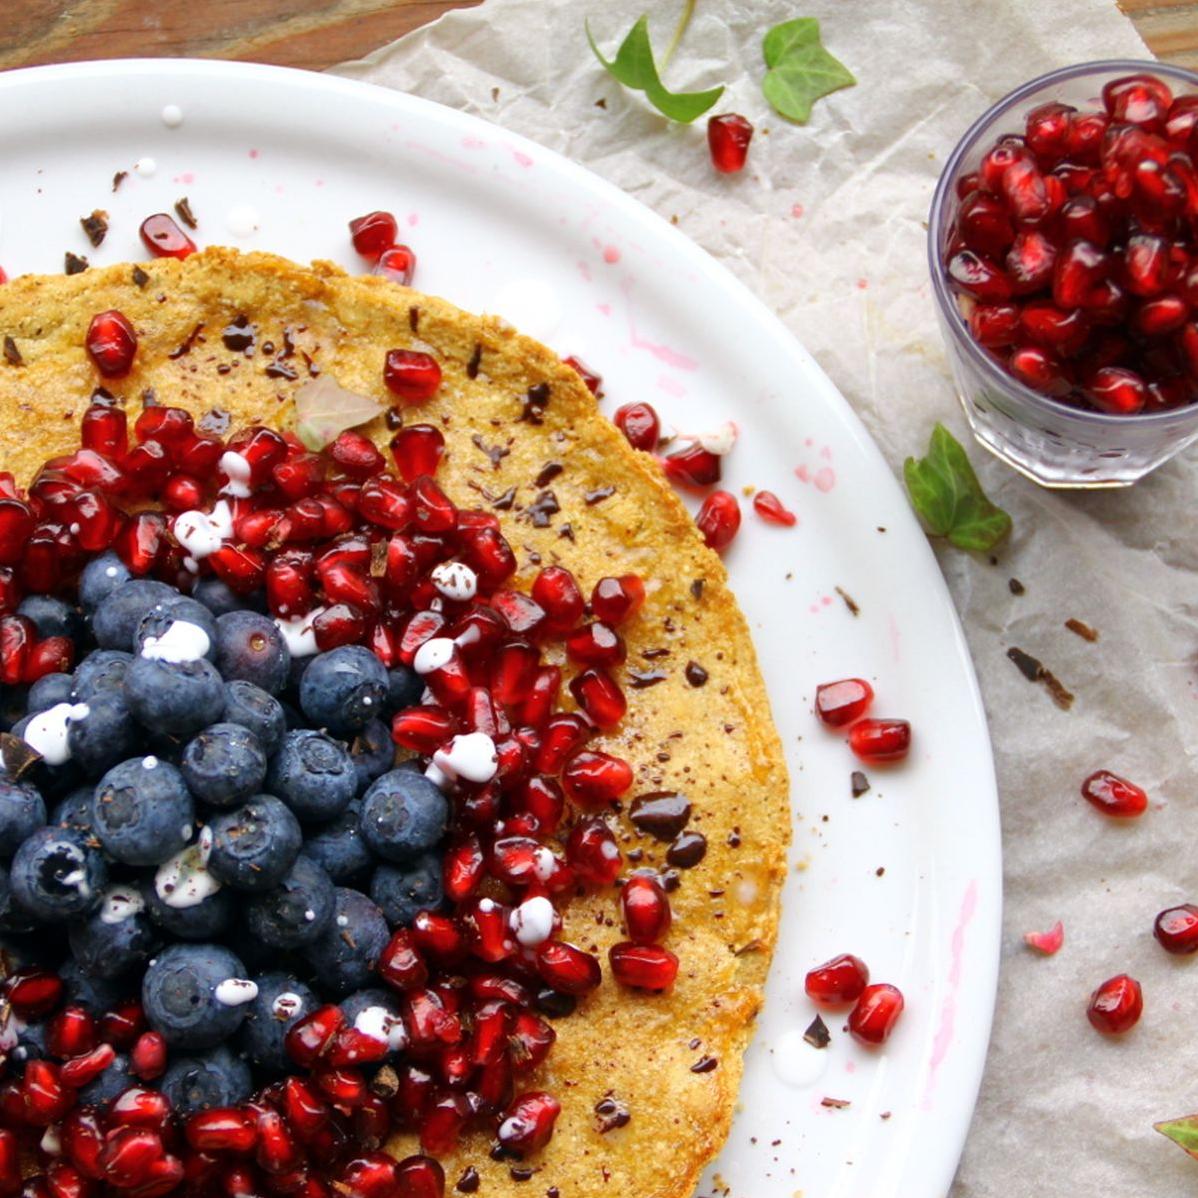  A sweet and tangy Pomegranate Berry Shortbread to satisfy all your cravings!